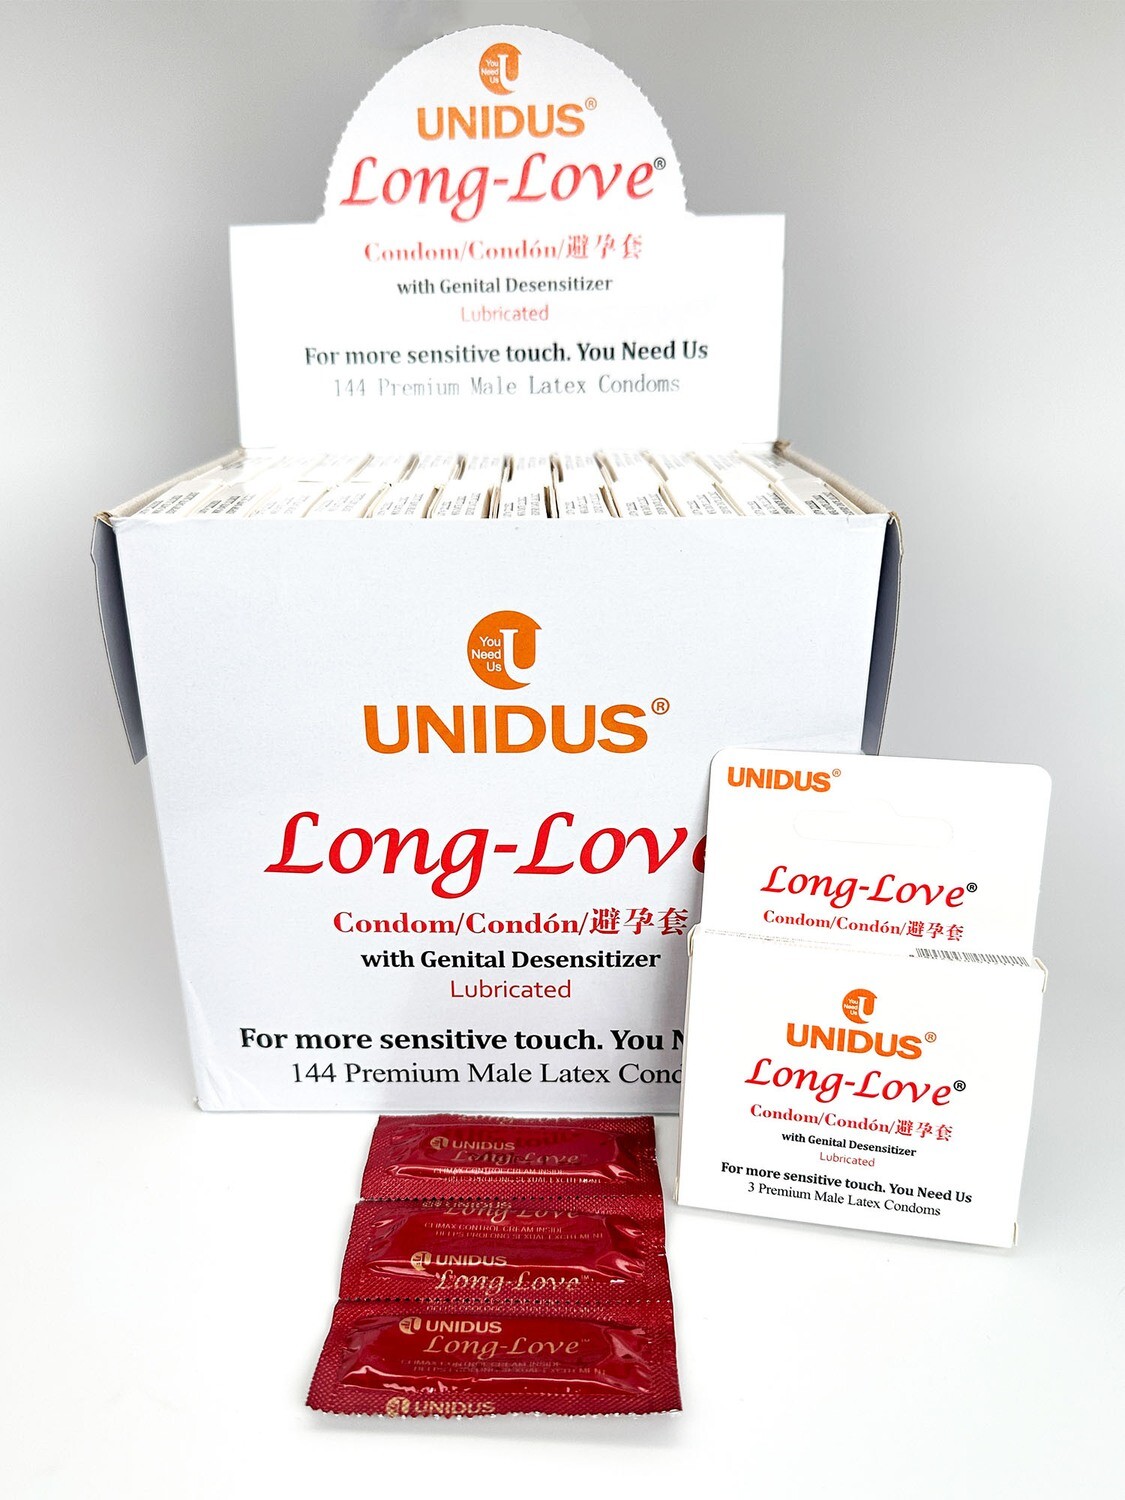 Wholesale - Long Love® Unidus® Condom White Packing - Lot of 5 display cases (each containing 144 condoms) - Total 720 condoms